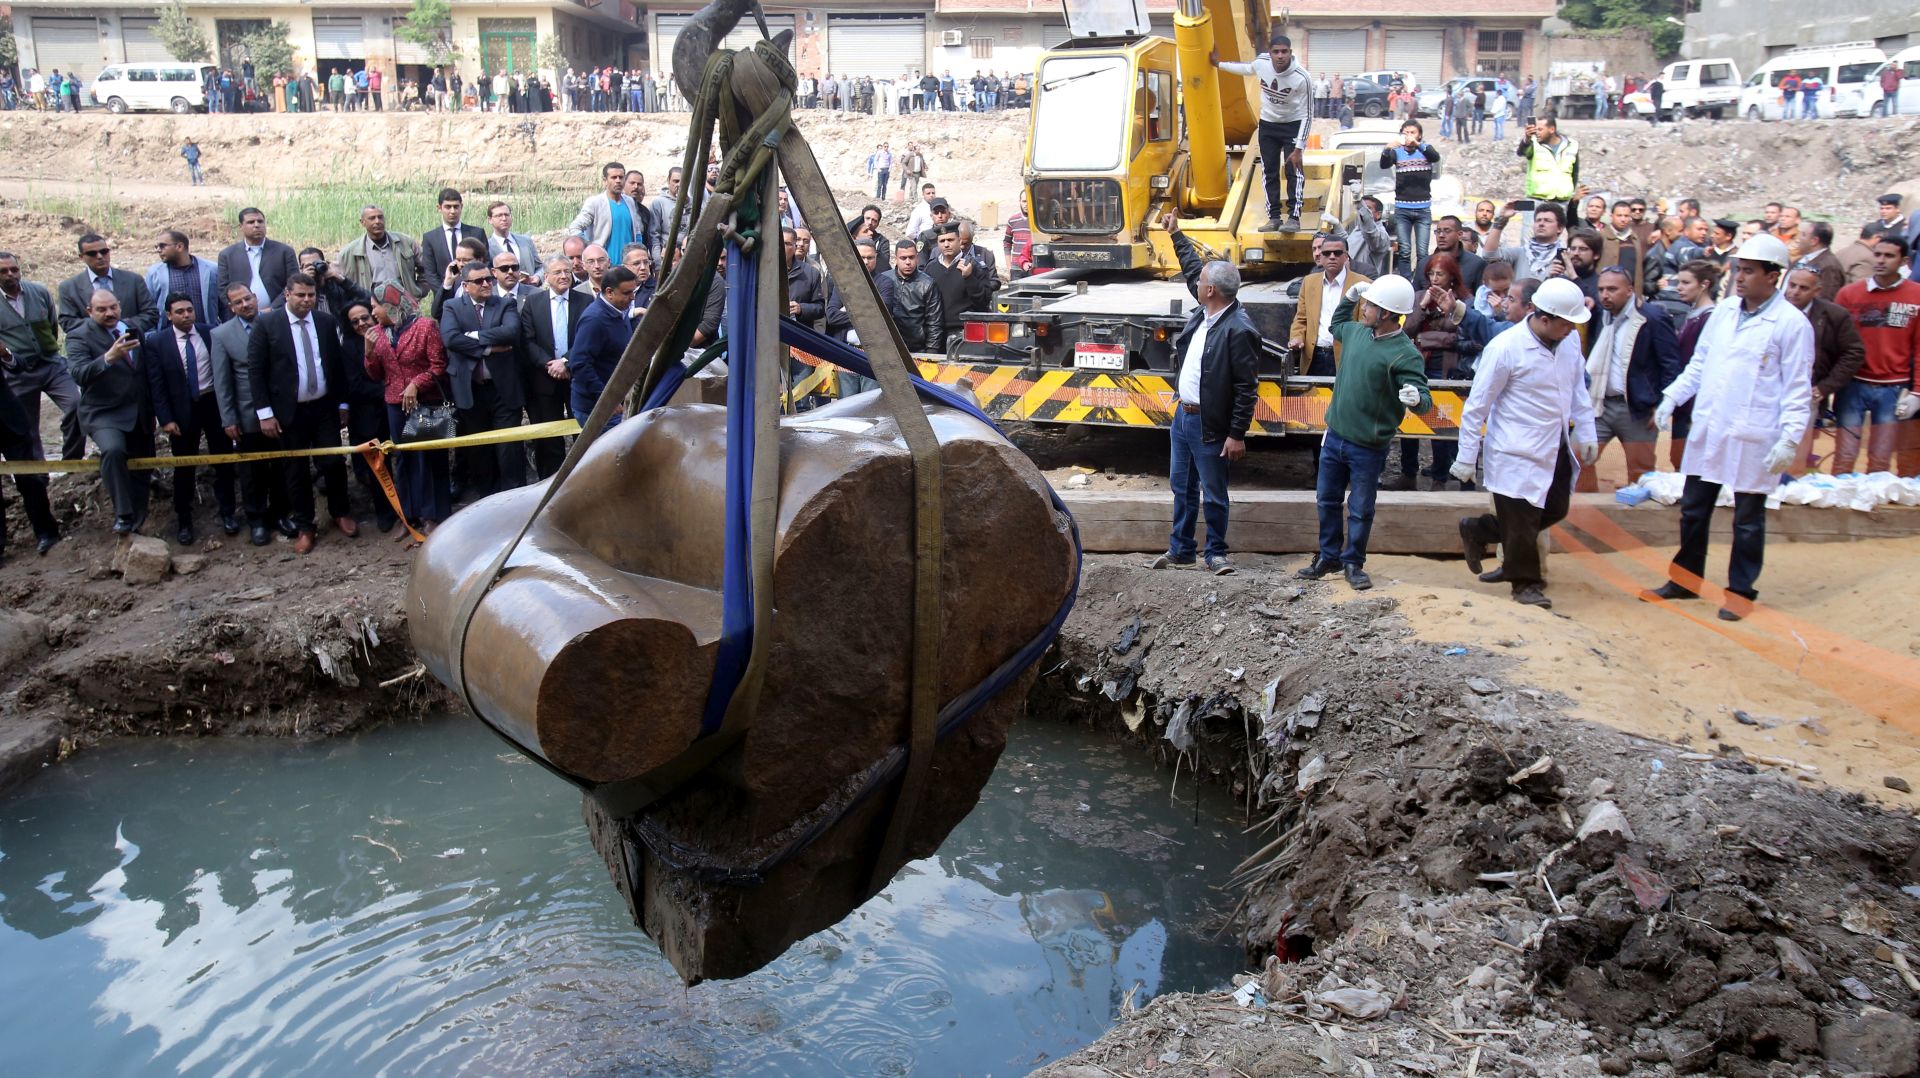 epa05845435 Egyptians look on as a crane lifts parts of a statue for restoration after it was unearthed at Souq al-Khamis district, at al-Matareya area, Cairo, Egypt, 13 March 2017. According to the Ministry of Antiquities, a German-Egyptian archaeological mission found in parts two 19th dynasty royal statues in the vicinity of King Ramses II temple in ancient Heliopolis.  EPA/KHALED ELFIQI